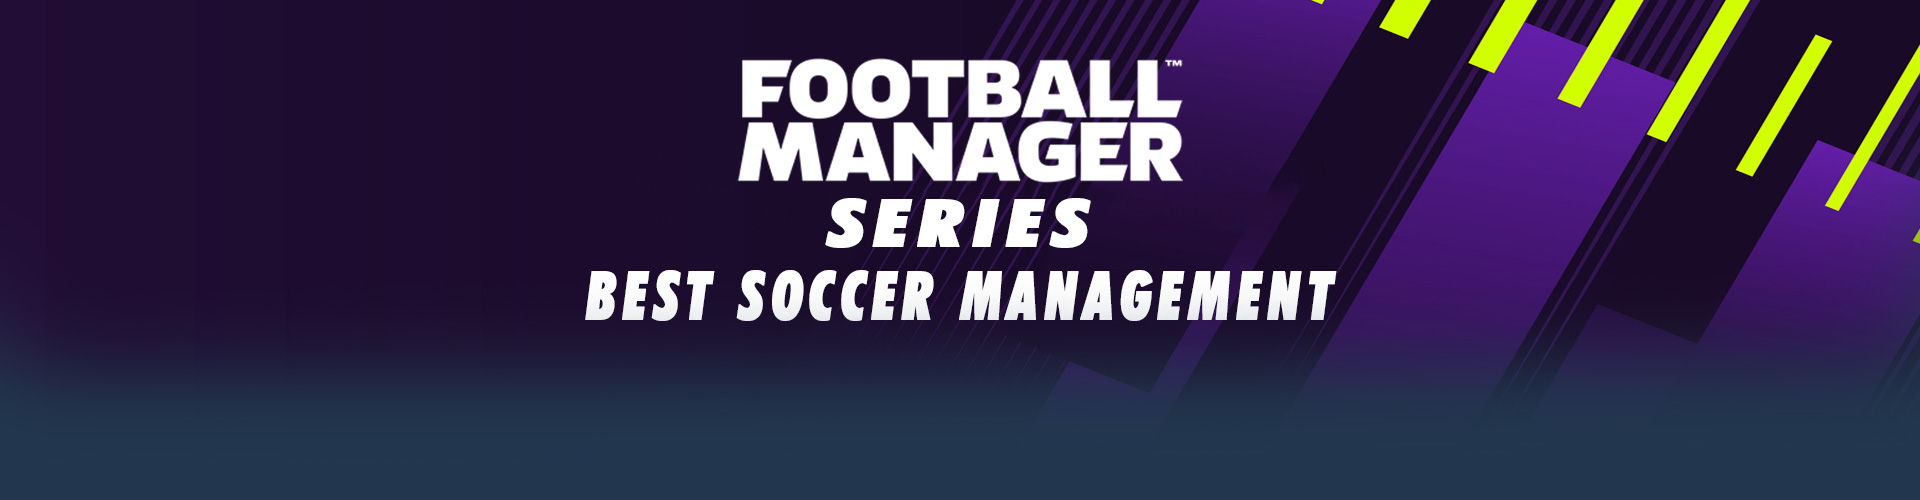 Football Manager Serie